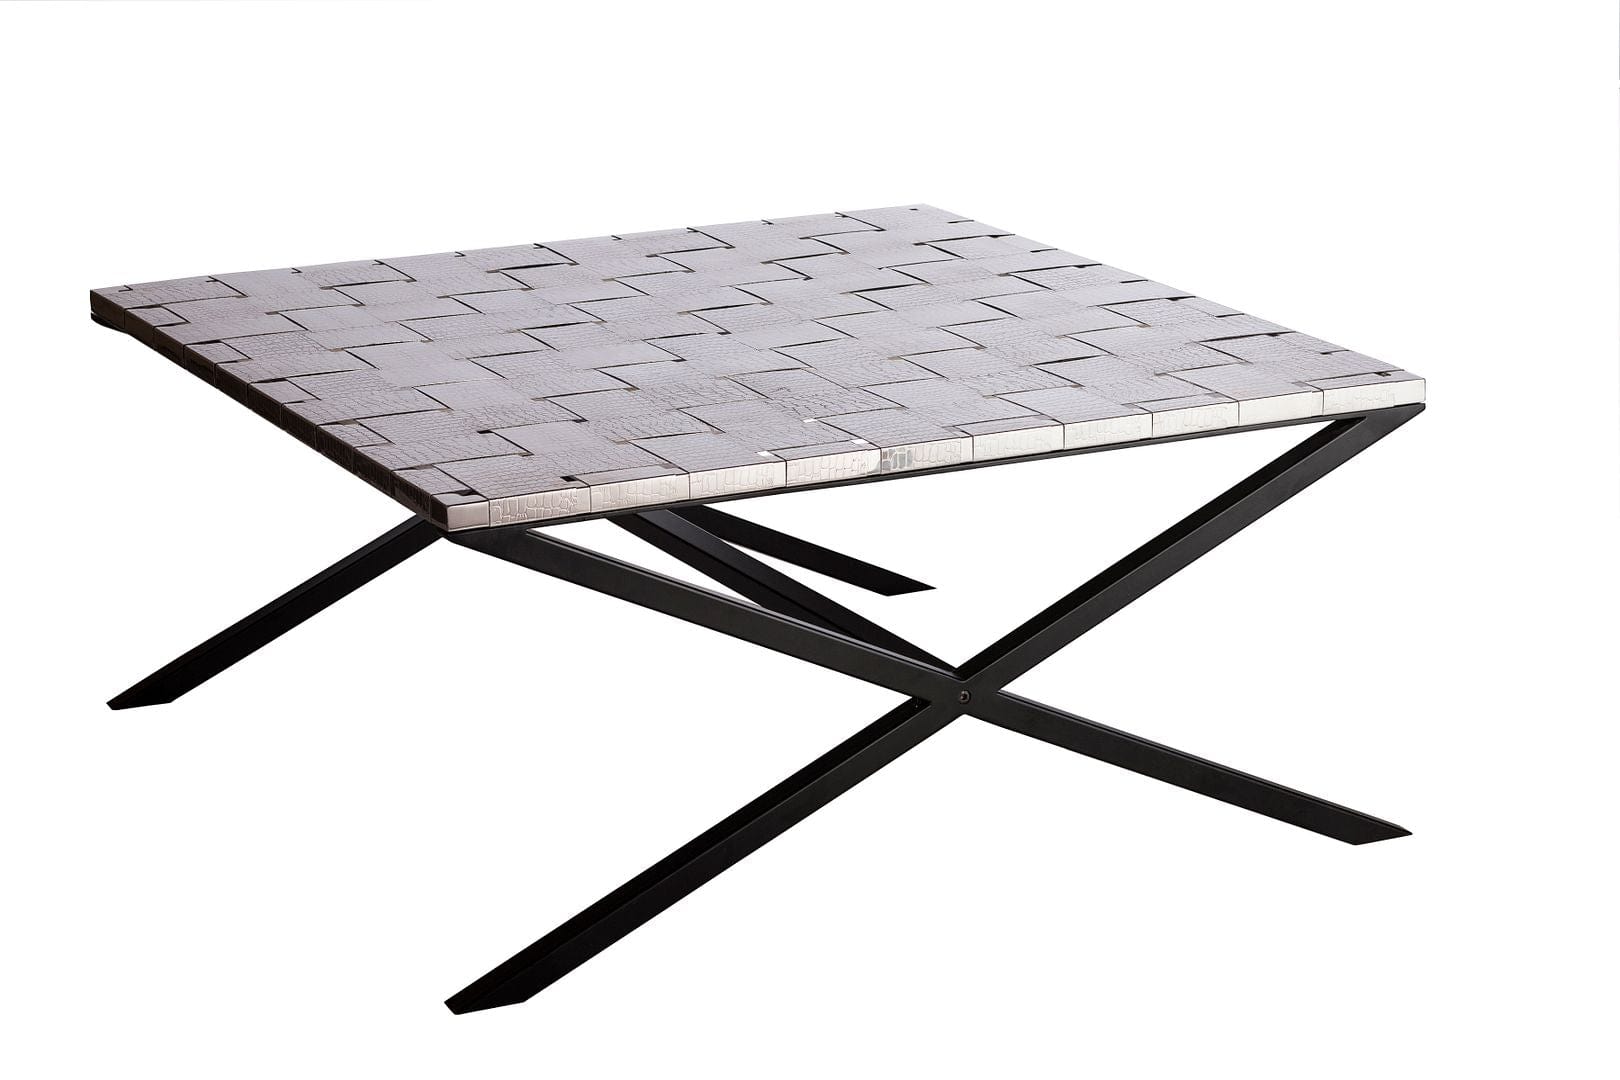 Stylish Black Coffee Table with Stainless Steel Woven Top